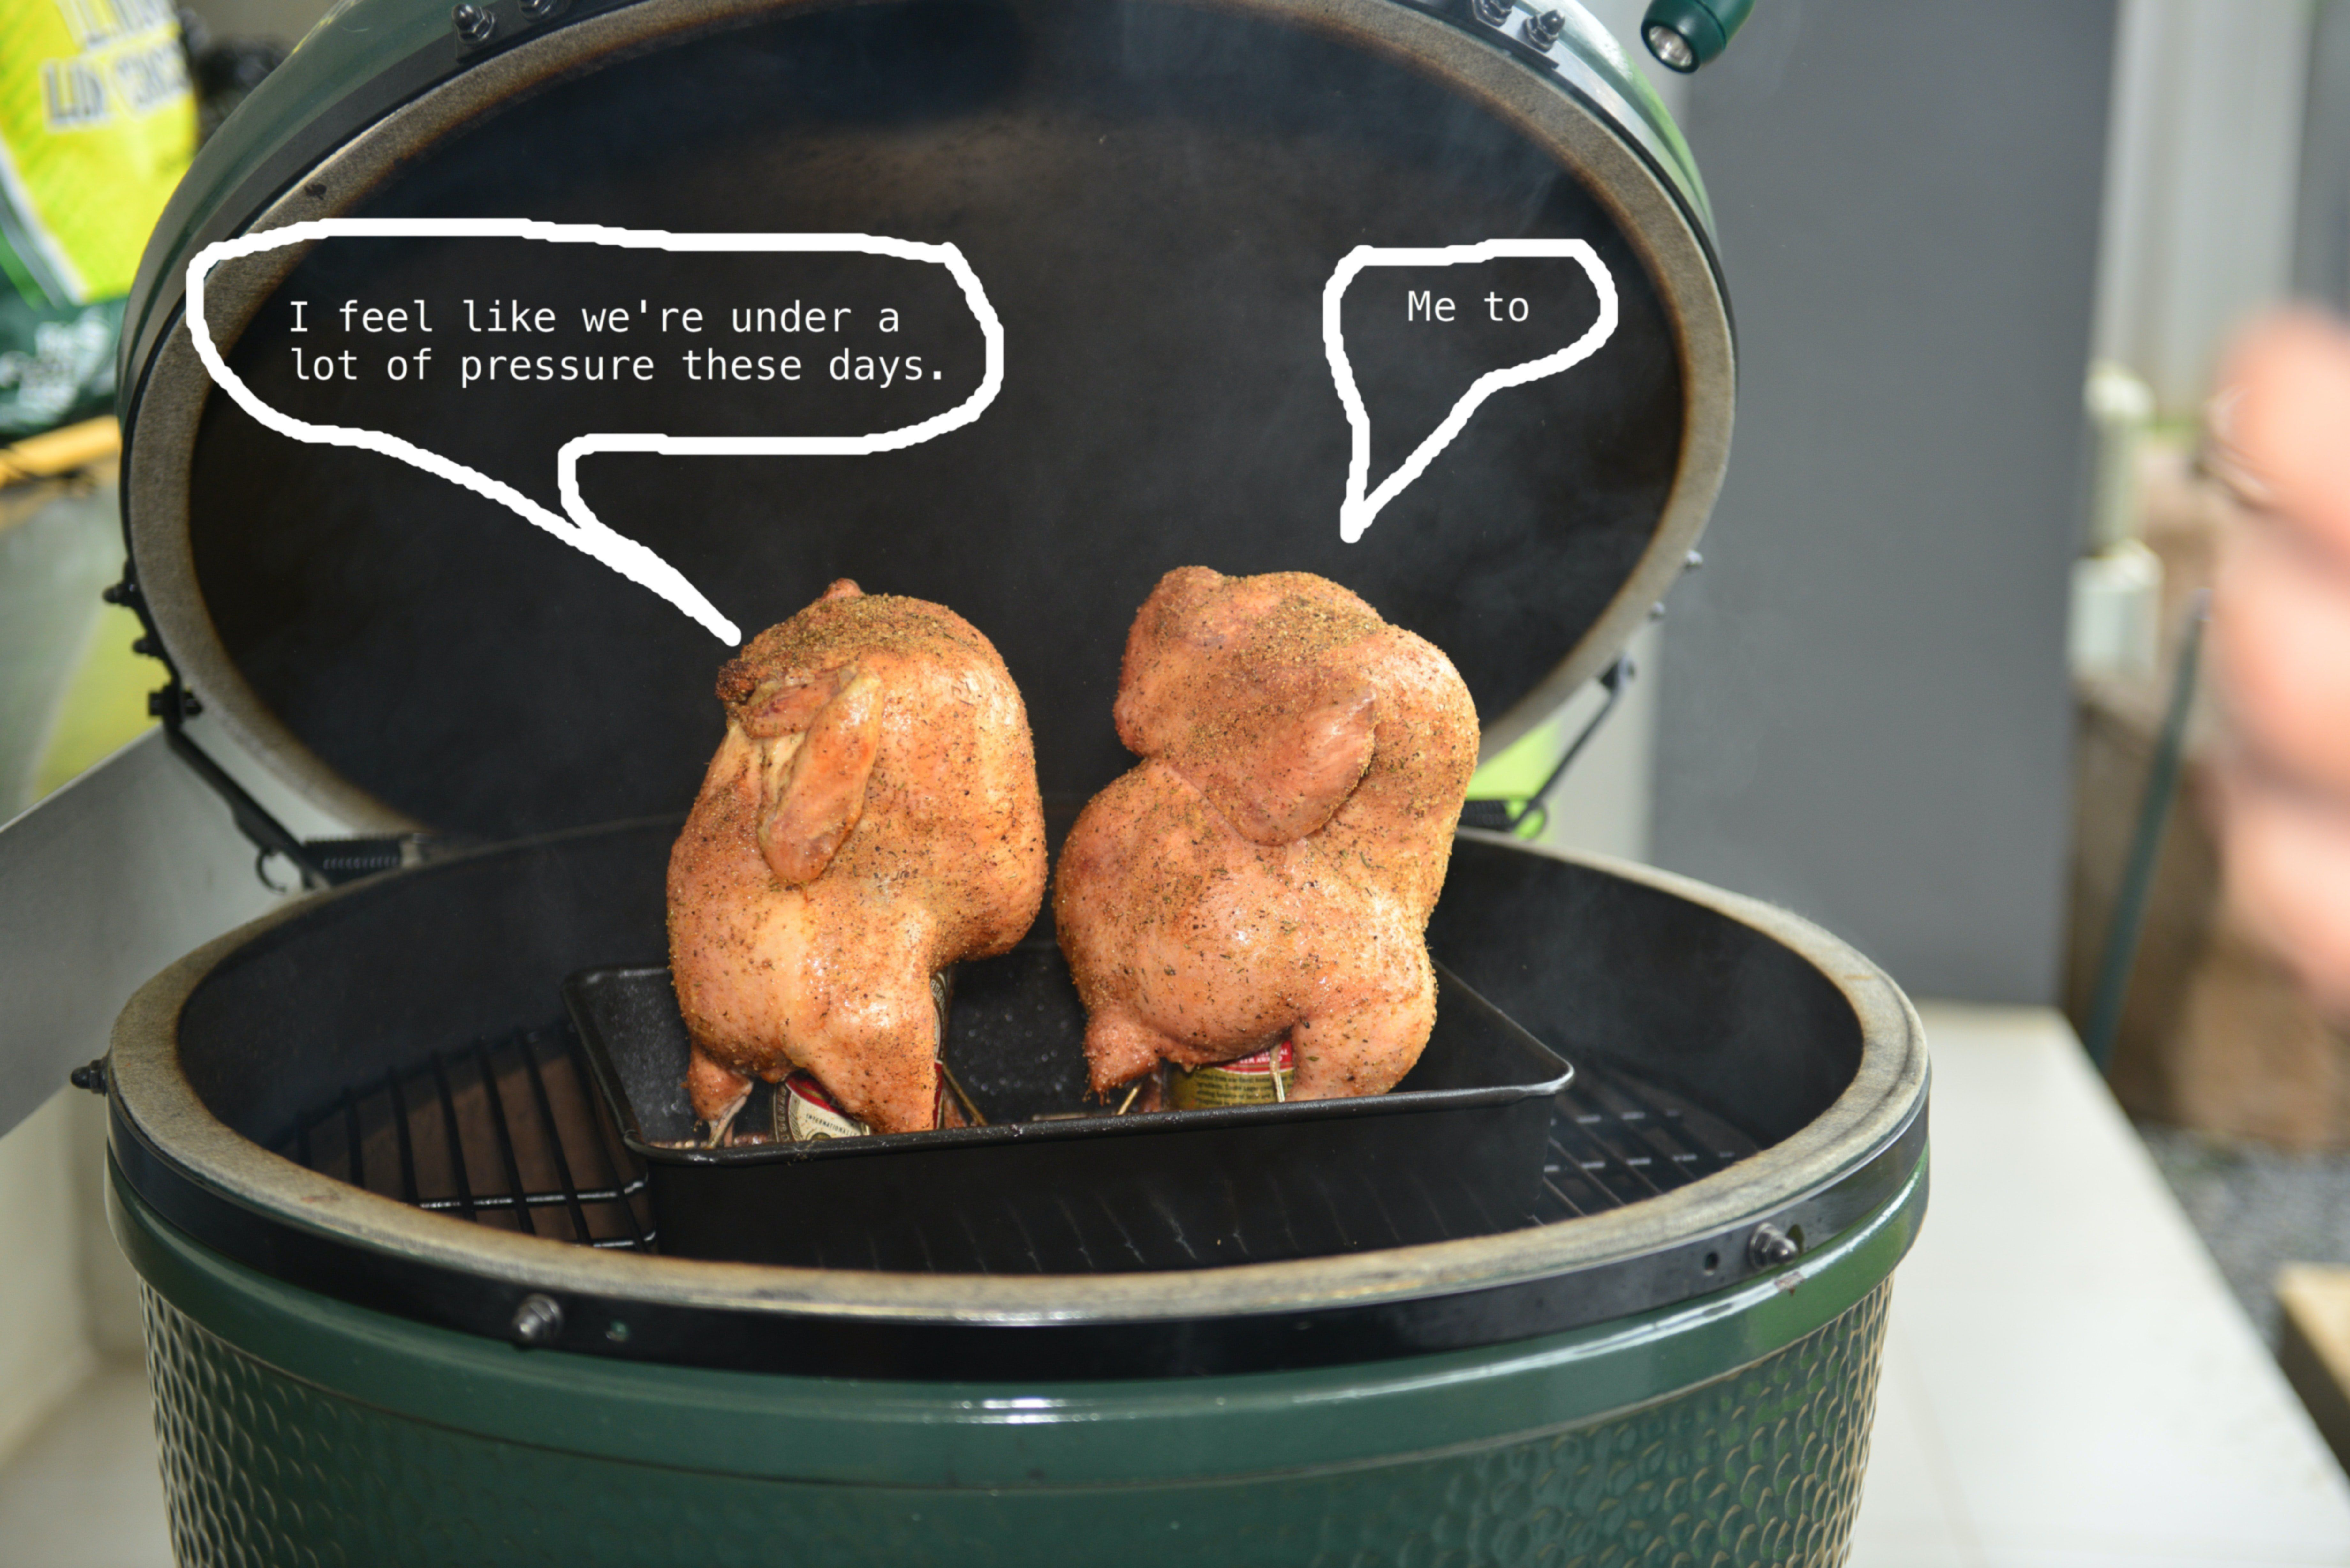 Two roasted chickens in a pressure cooker